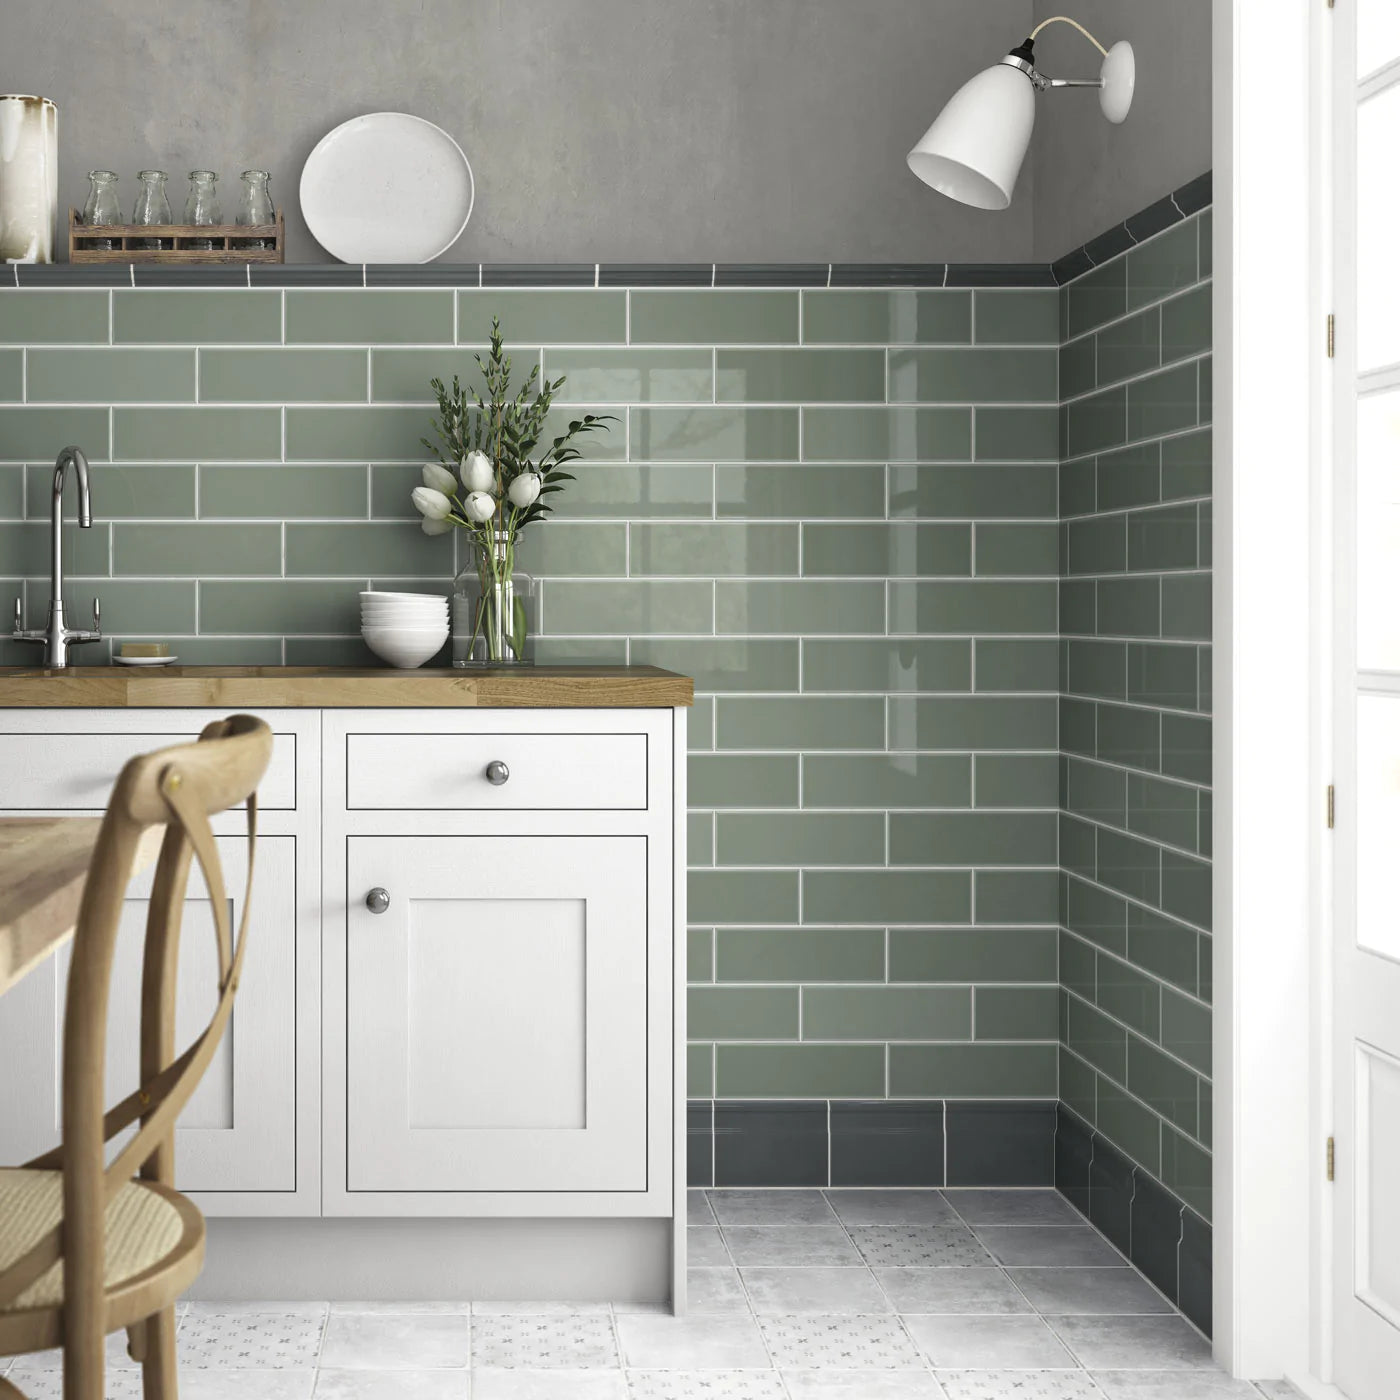 10x30cm Savoy Sage gloss wall tile half tiled wall in a cottagecore kitchen setting with white farmhouse kitchen cabinets, wooden worktop, vase of flowers and wooden kitchen chair